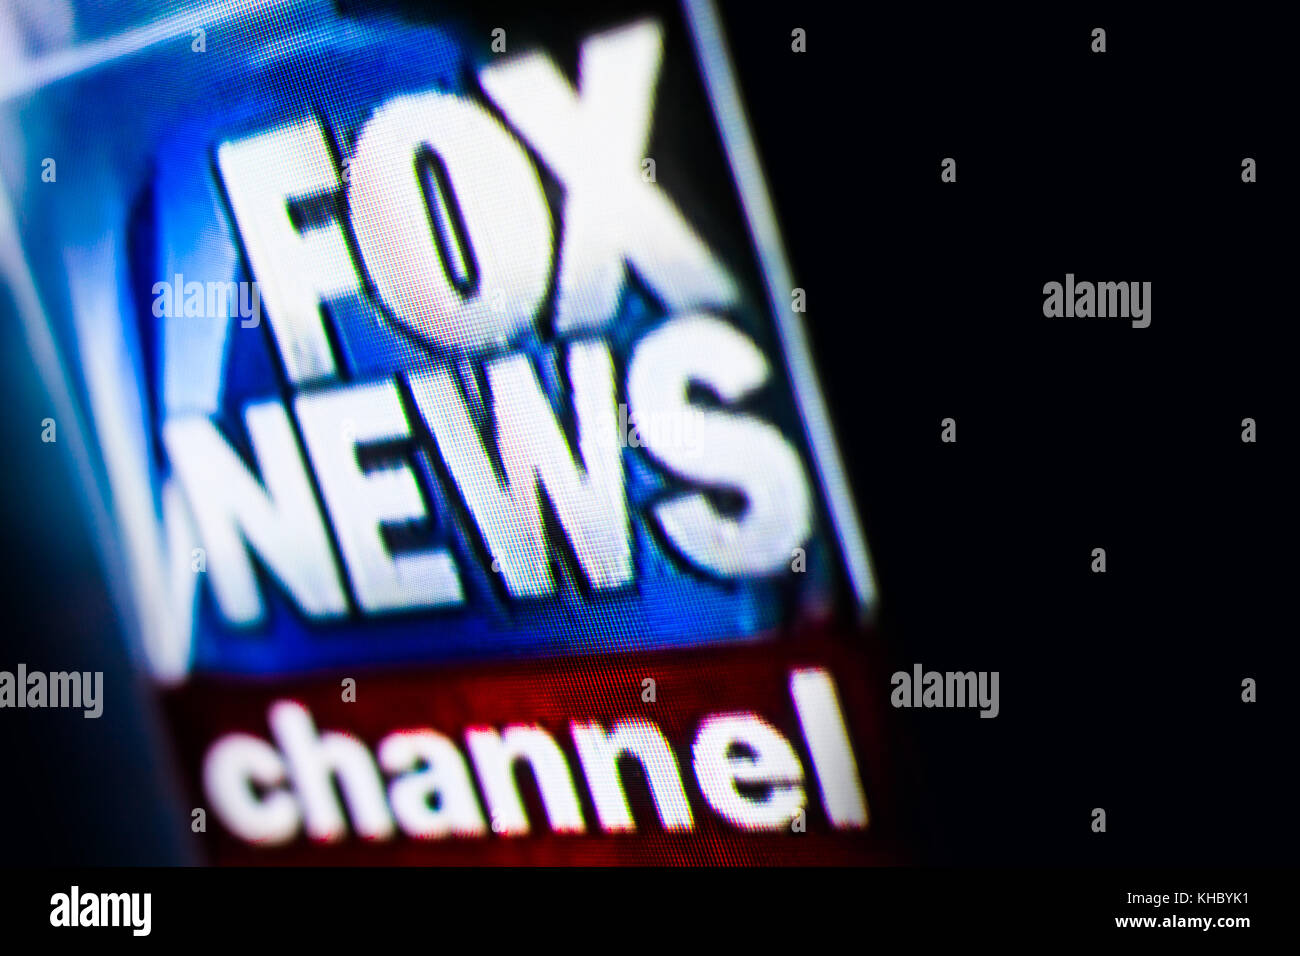 Fox News Channel Stock Photos & Fox News Channel Stock Images - Alamy1300 x 956